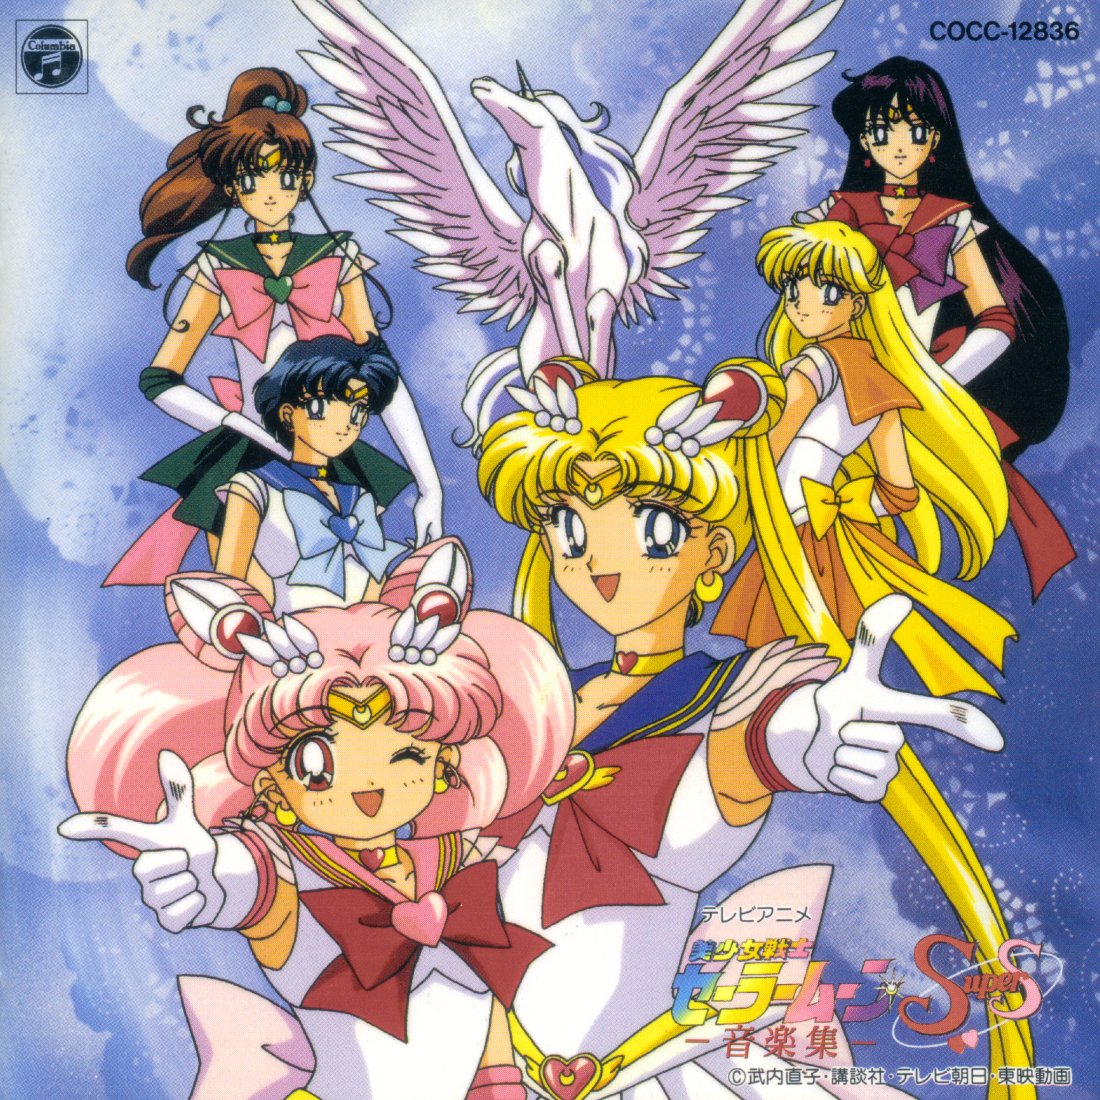 http://sailormusic.net/covers/Sailor%20Moon%20SuperS%20Music%20Collection.jpg